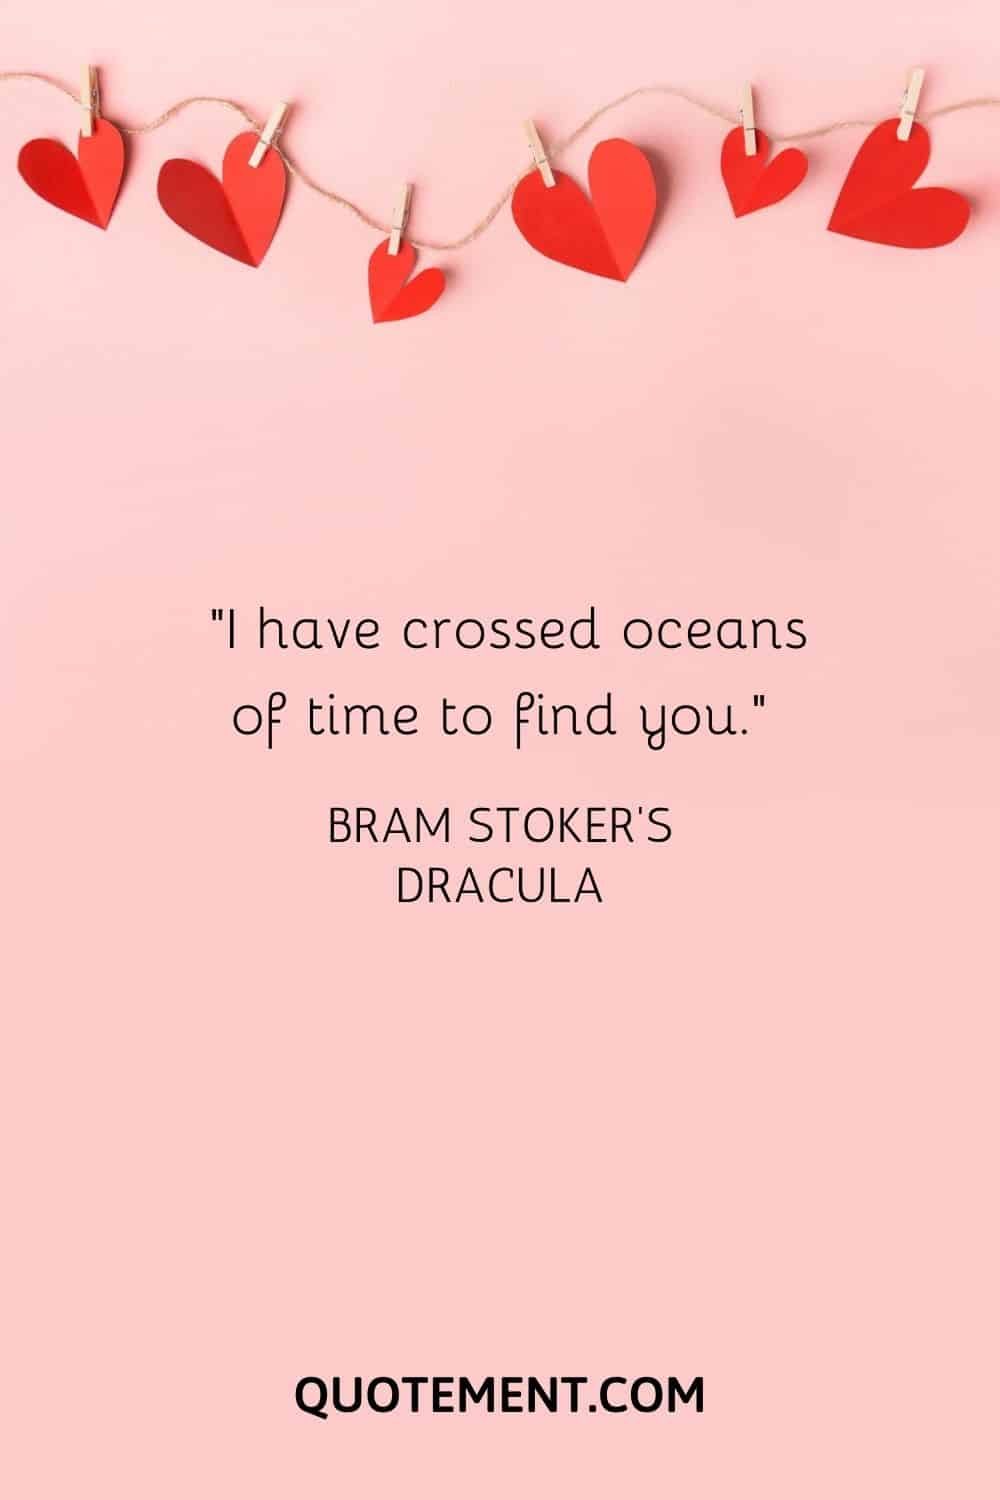 I have crossed oceans of time to find you